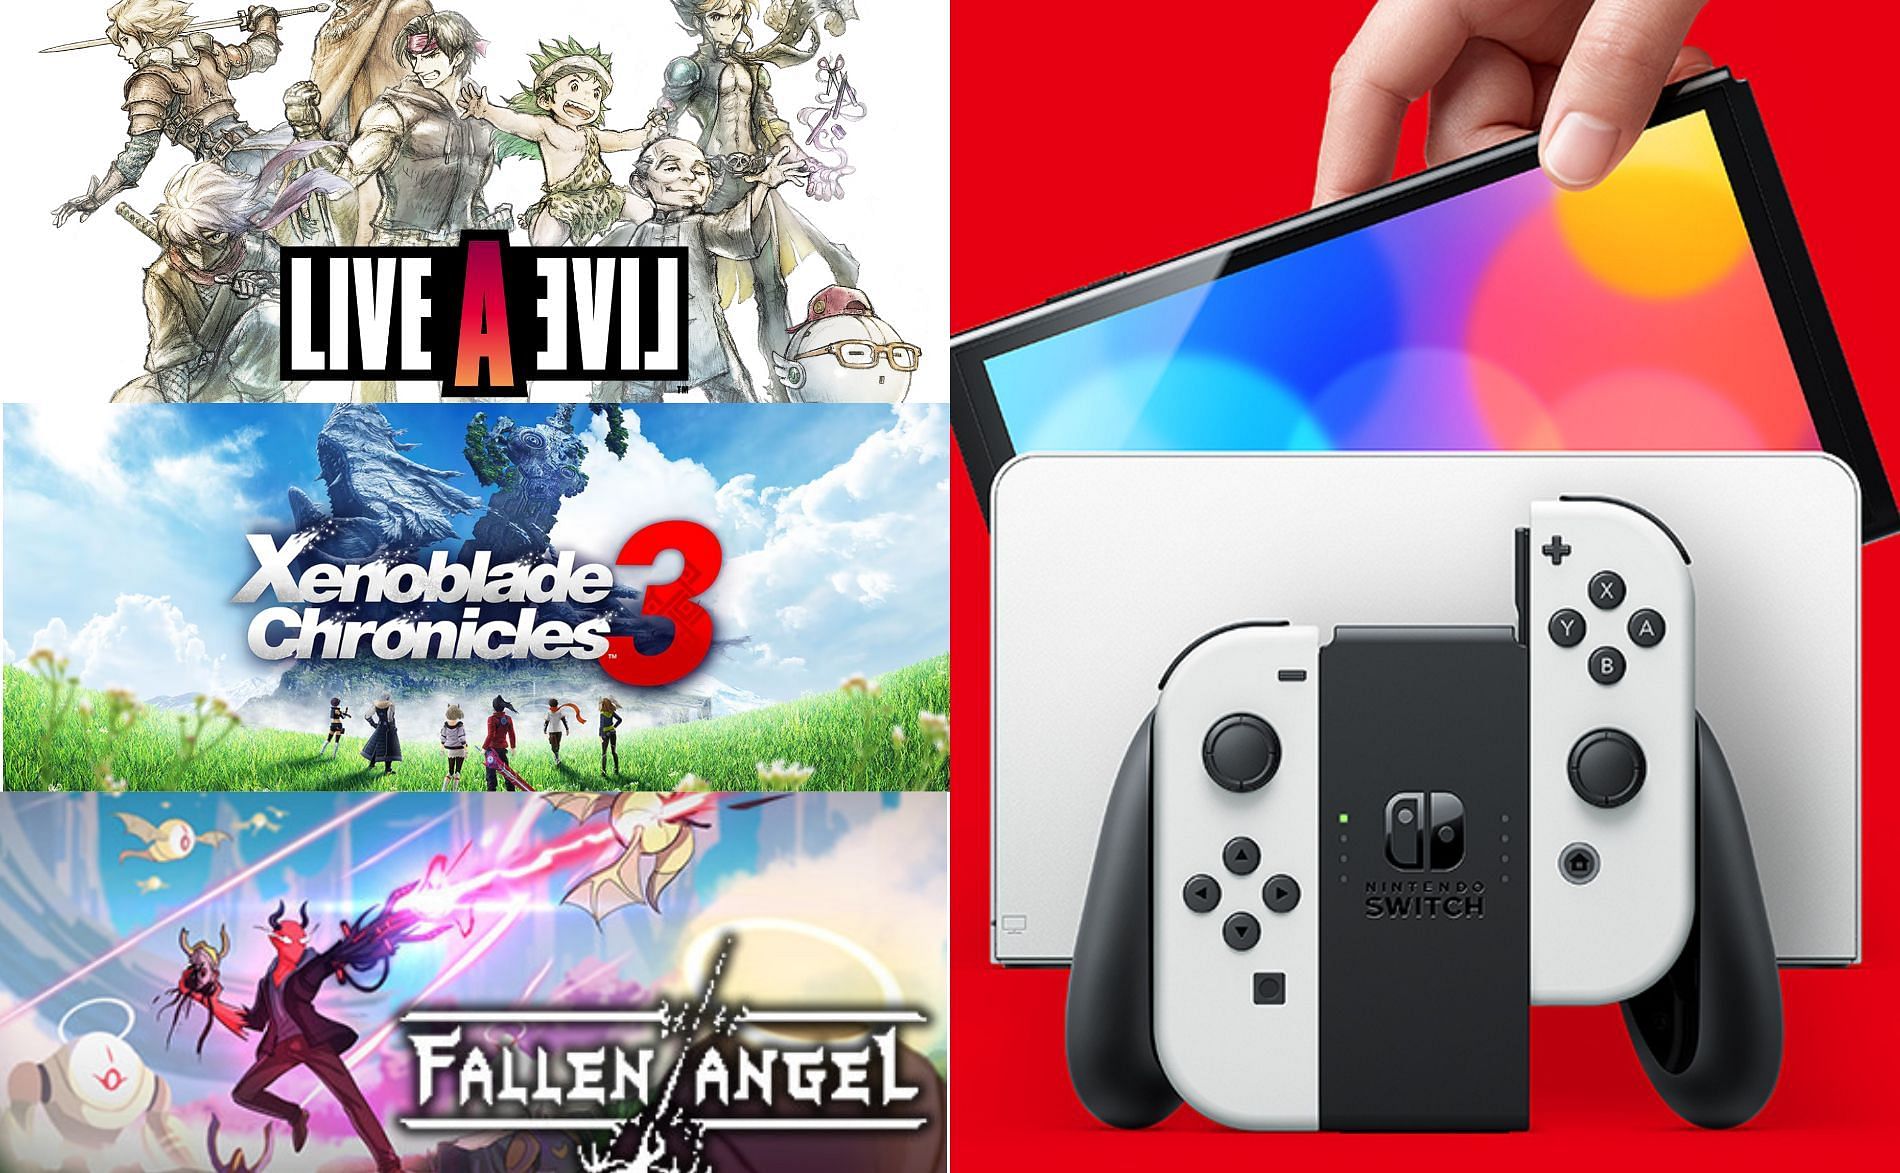 at fortsætte udtale halvleder All upcoming Nintendo Switch Games of July 2022 - Fallen Angel, Live A  Live, Xenoblade Chronicles 3, and more